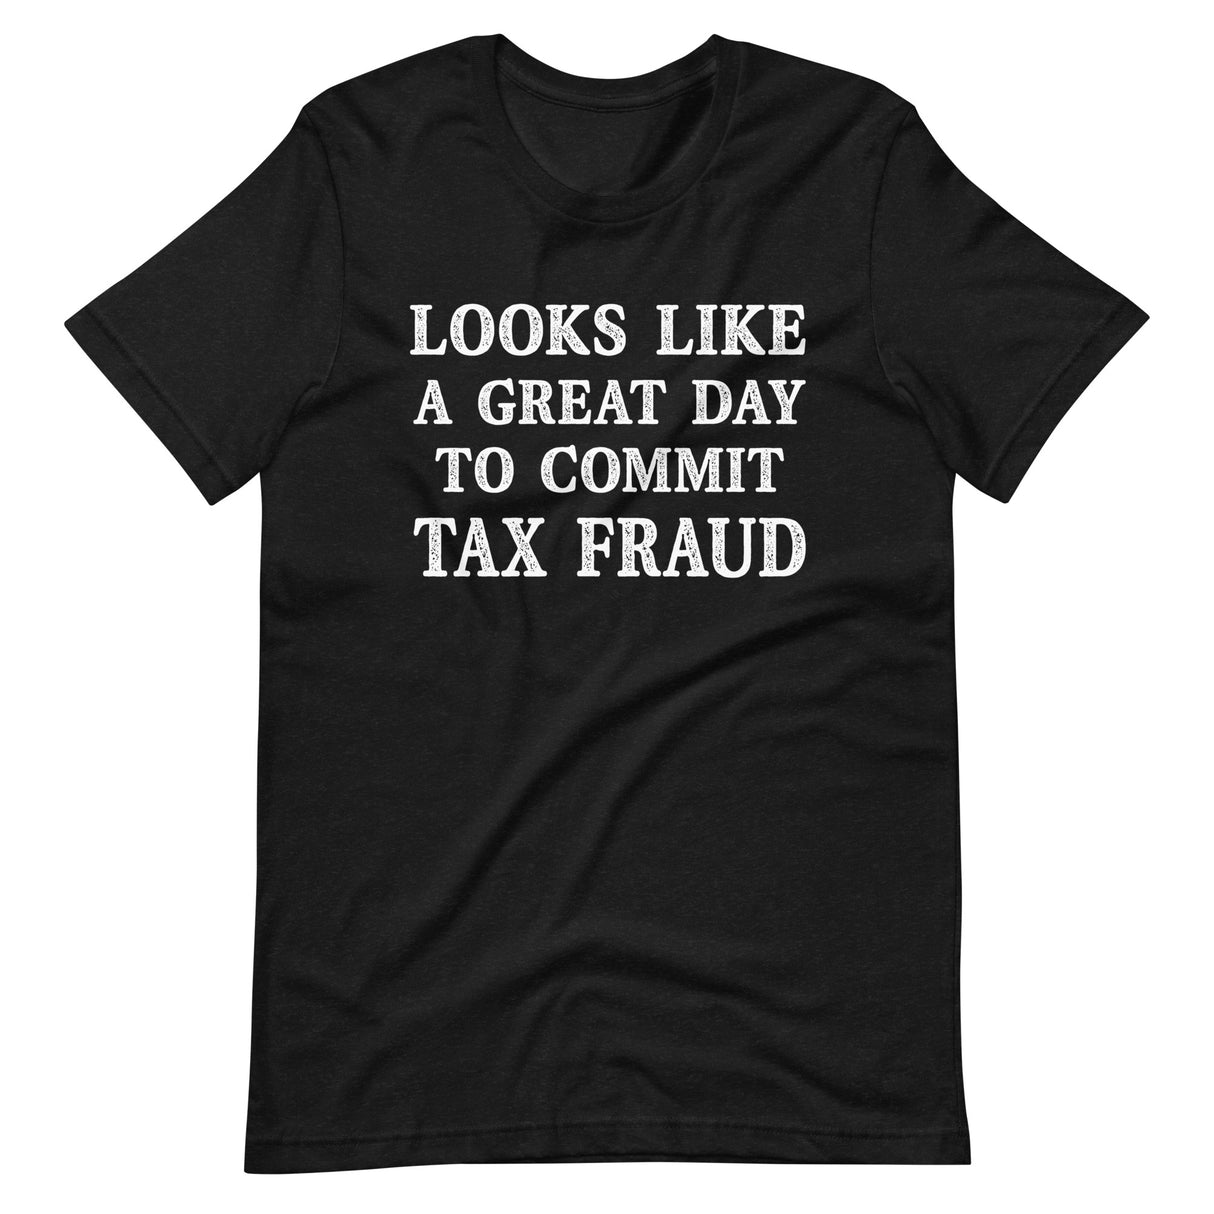 Looks Like a Great Day To Commit Tax Fraud Premium Shirt